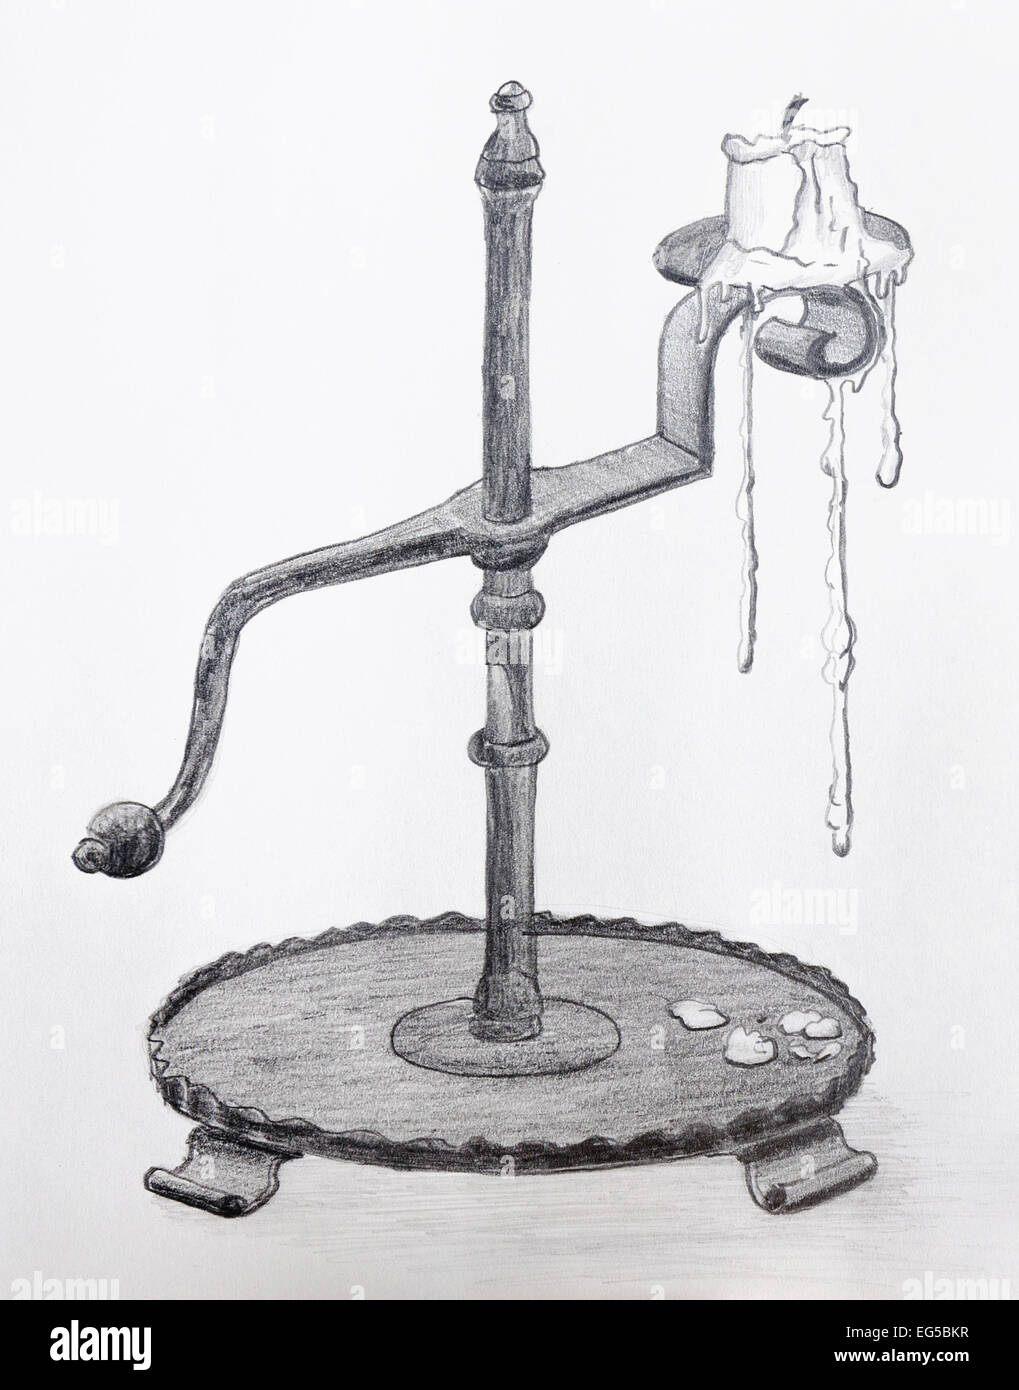 Pencil drawing of an old antique candle holder - grayscale on cartridge paper. Stock Photo